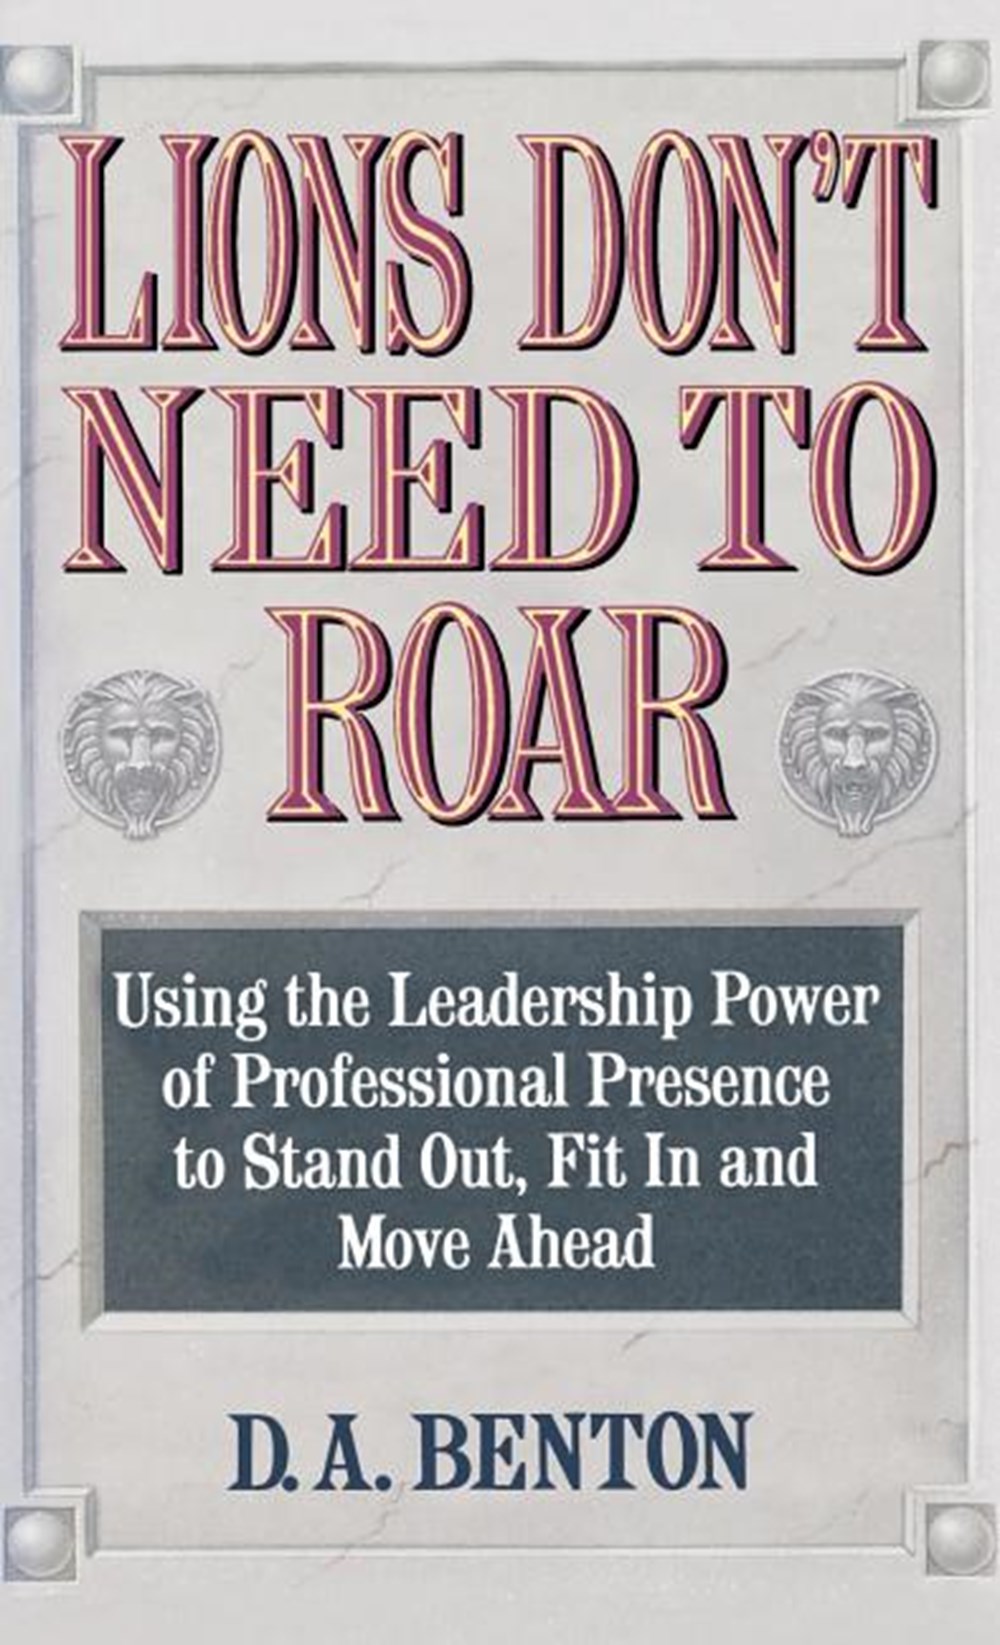 Lions Don't Need to Roar: Using the Leadership Power of Personal Presence to Stand Out, Fit in and M